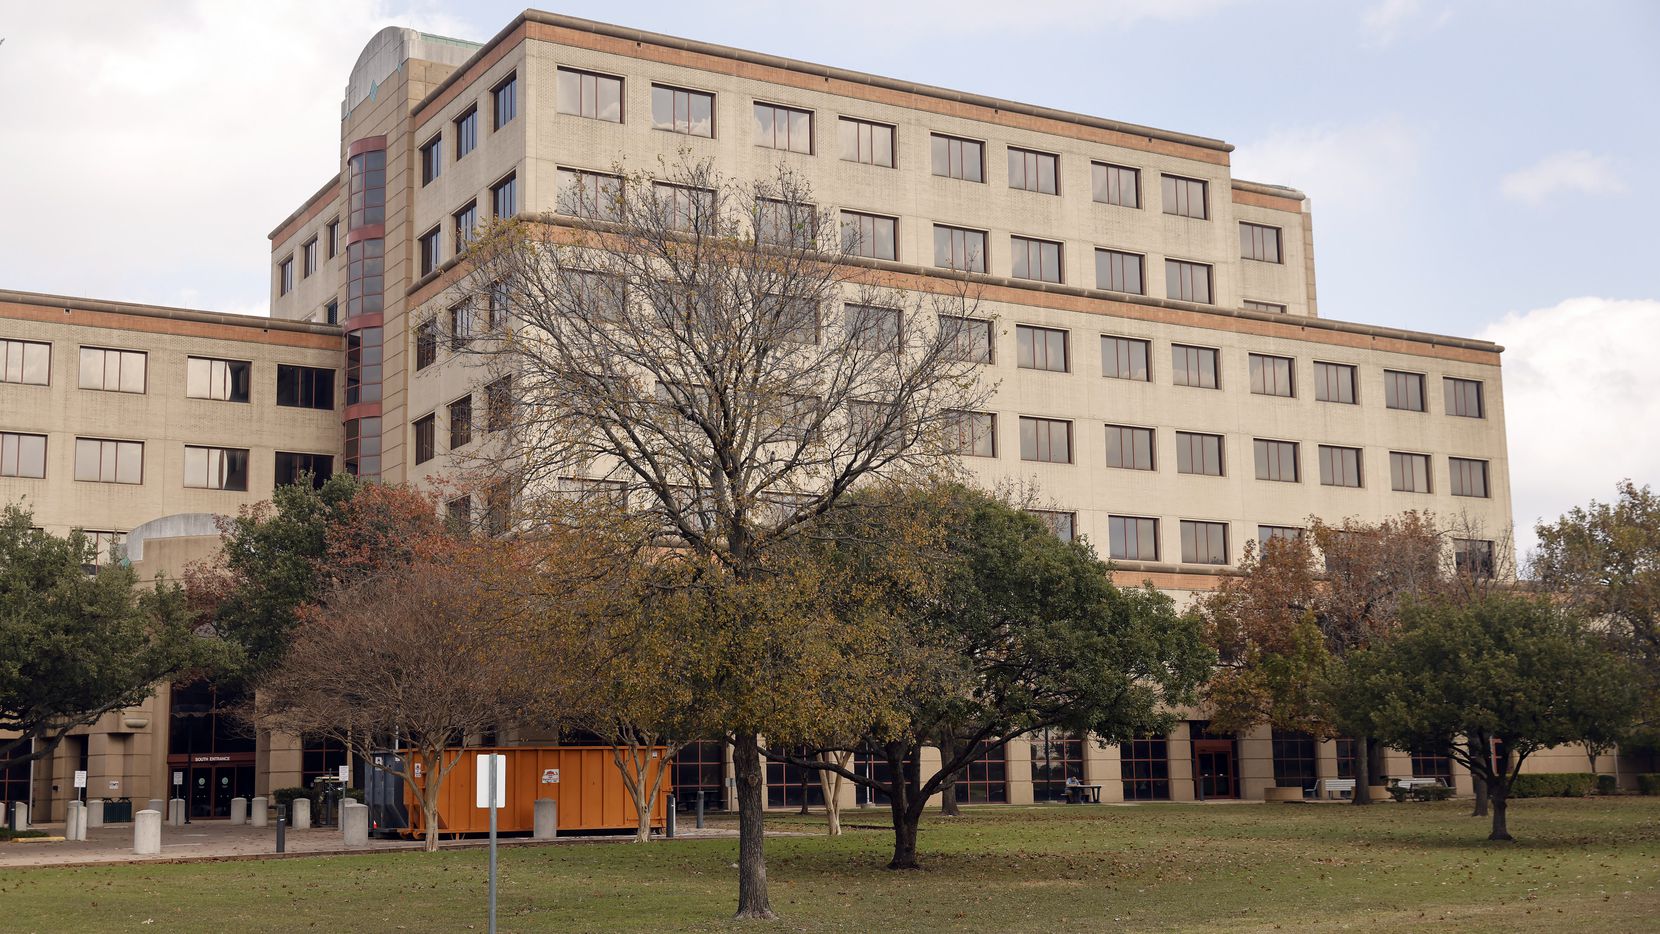 The Brown Heatly building which houses the Department of Family and Protective Services is...